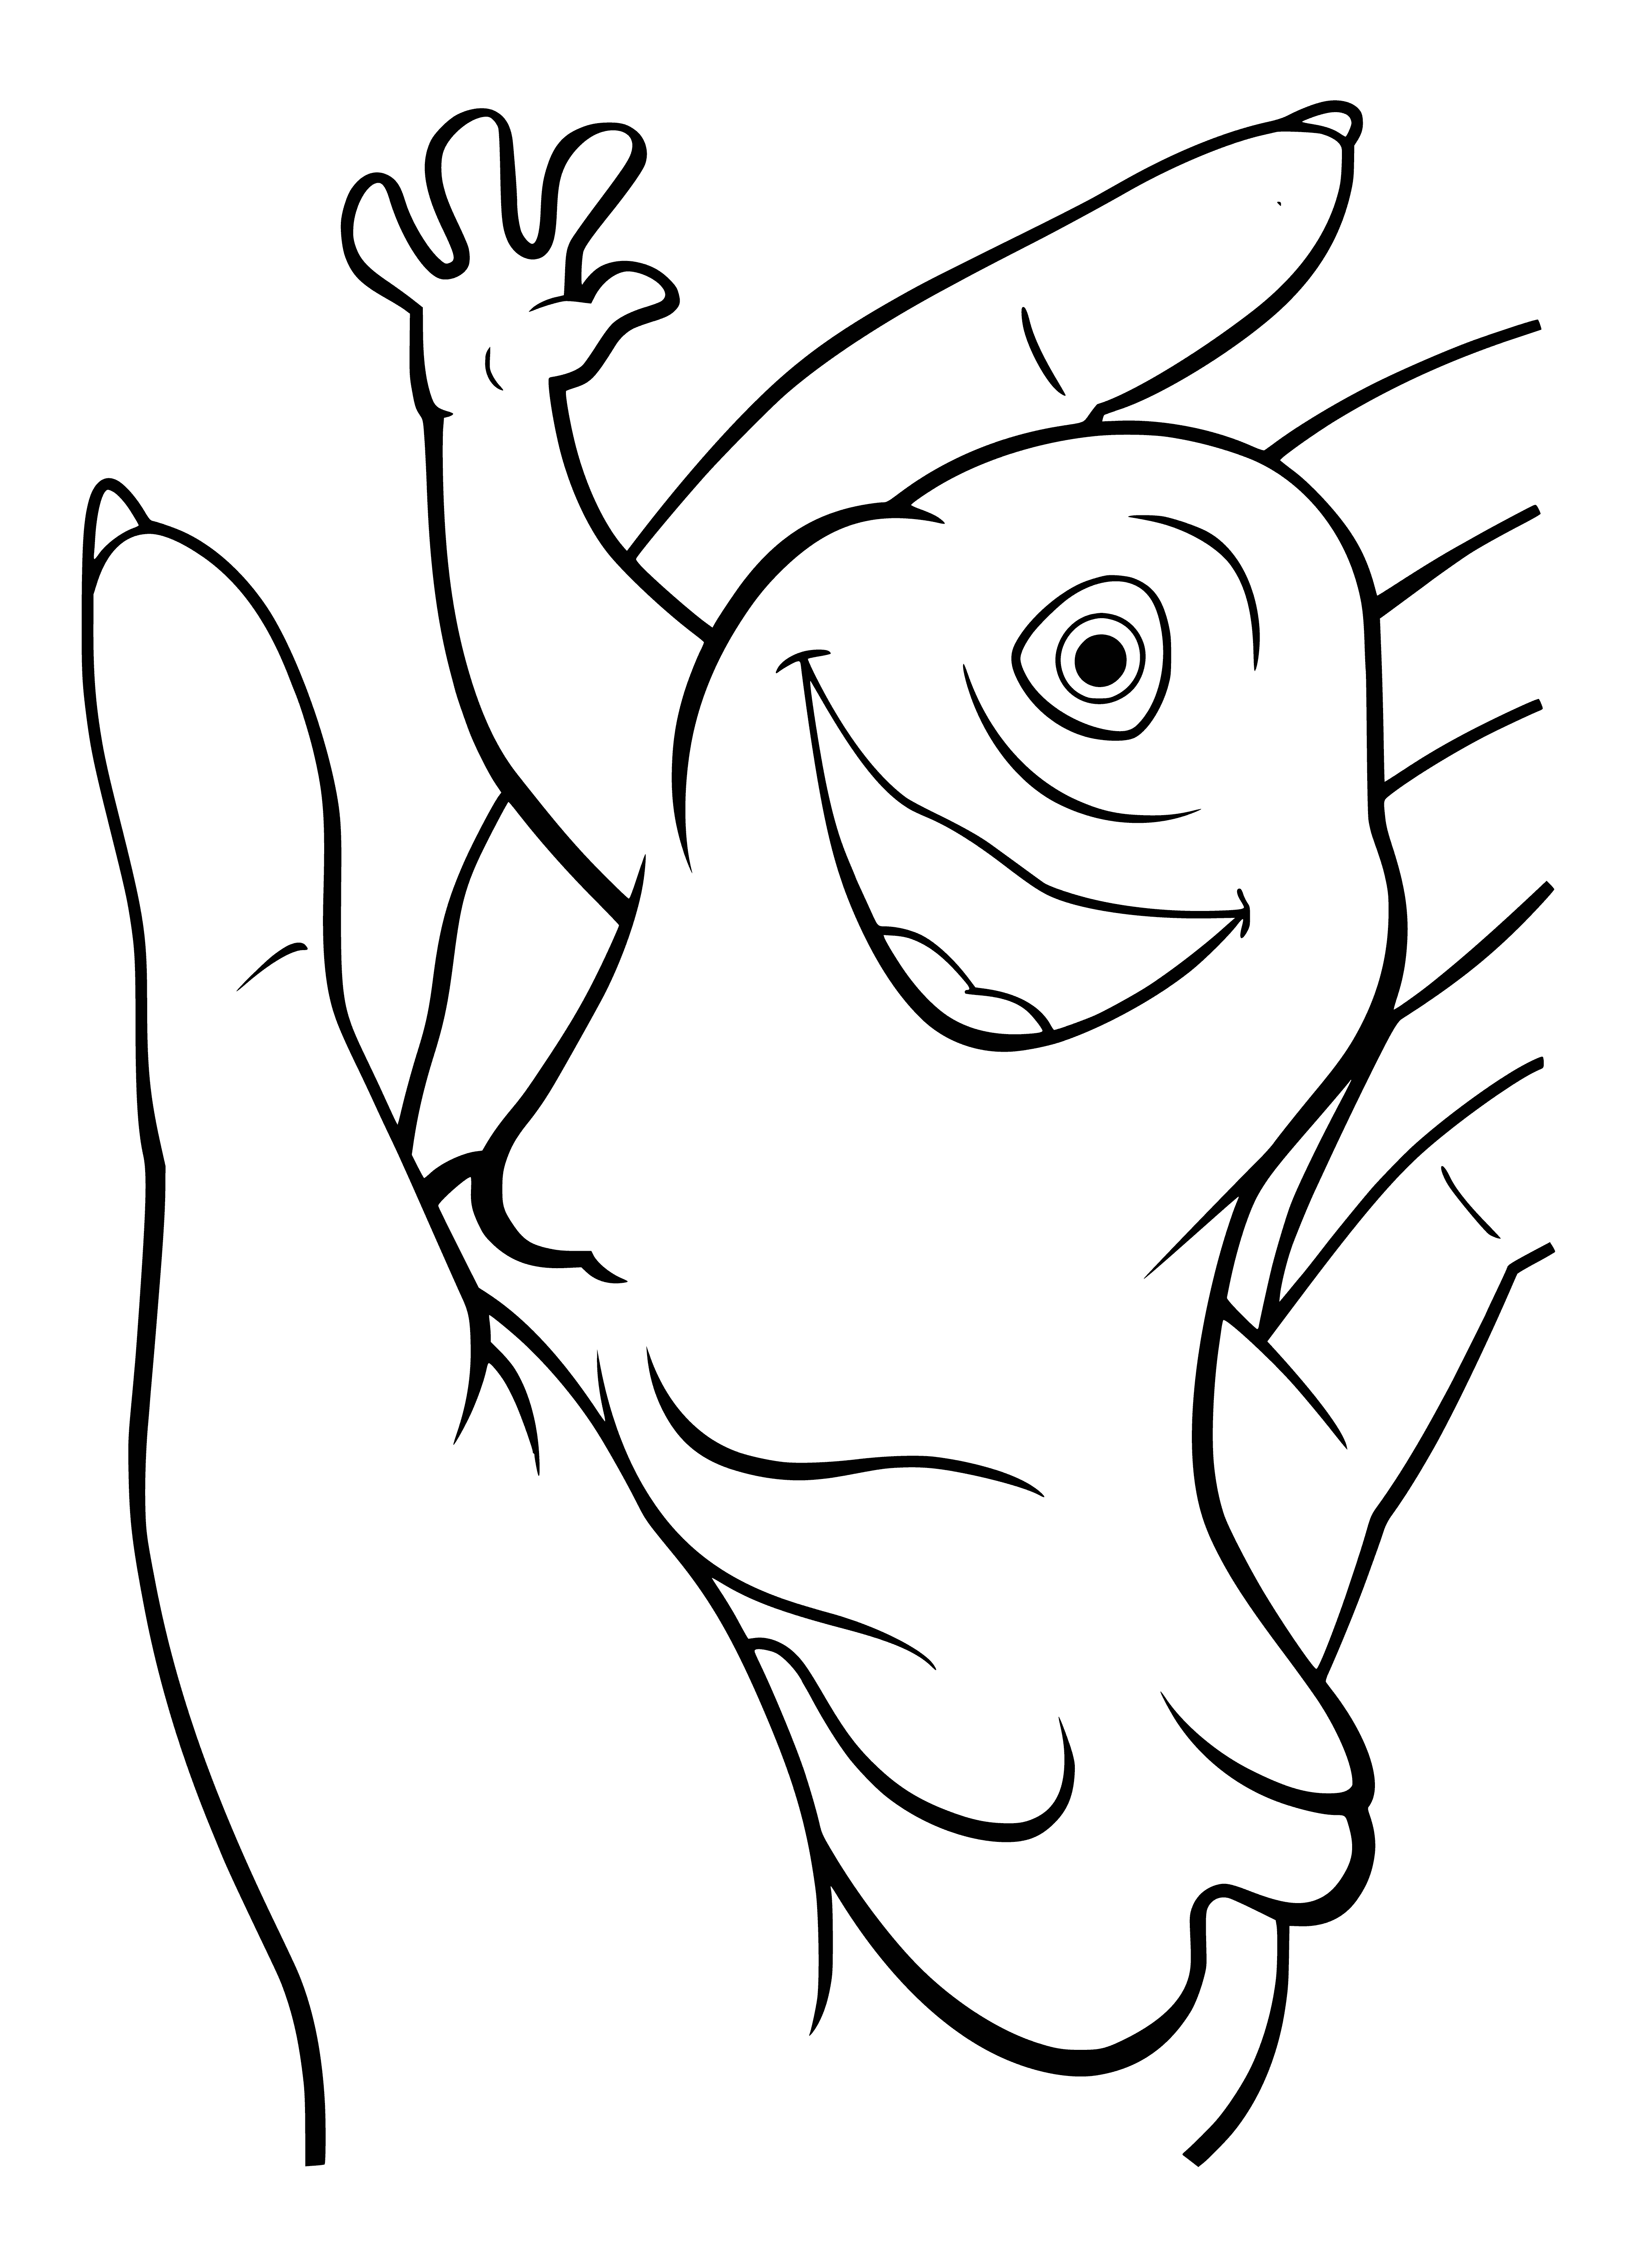 coloring page: Blob w/ big eye, black dots, long purple-tipped tentacles. Mysterious, but still cute!